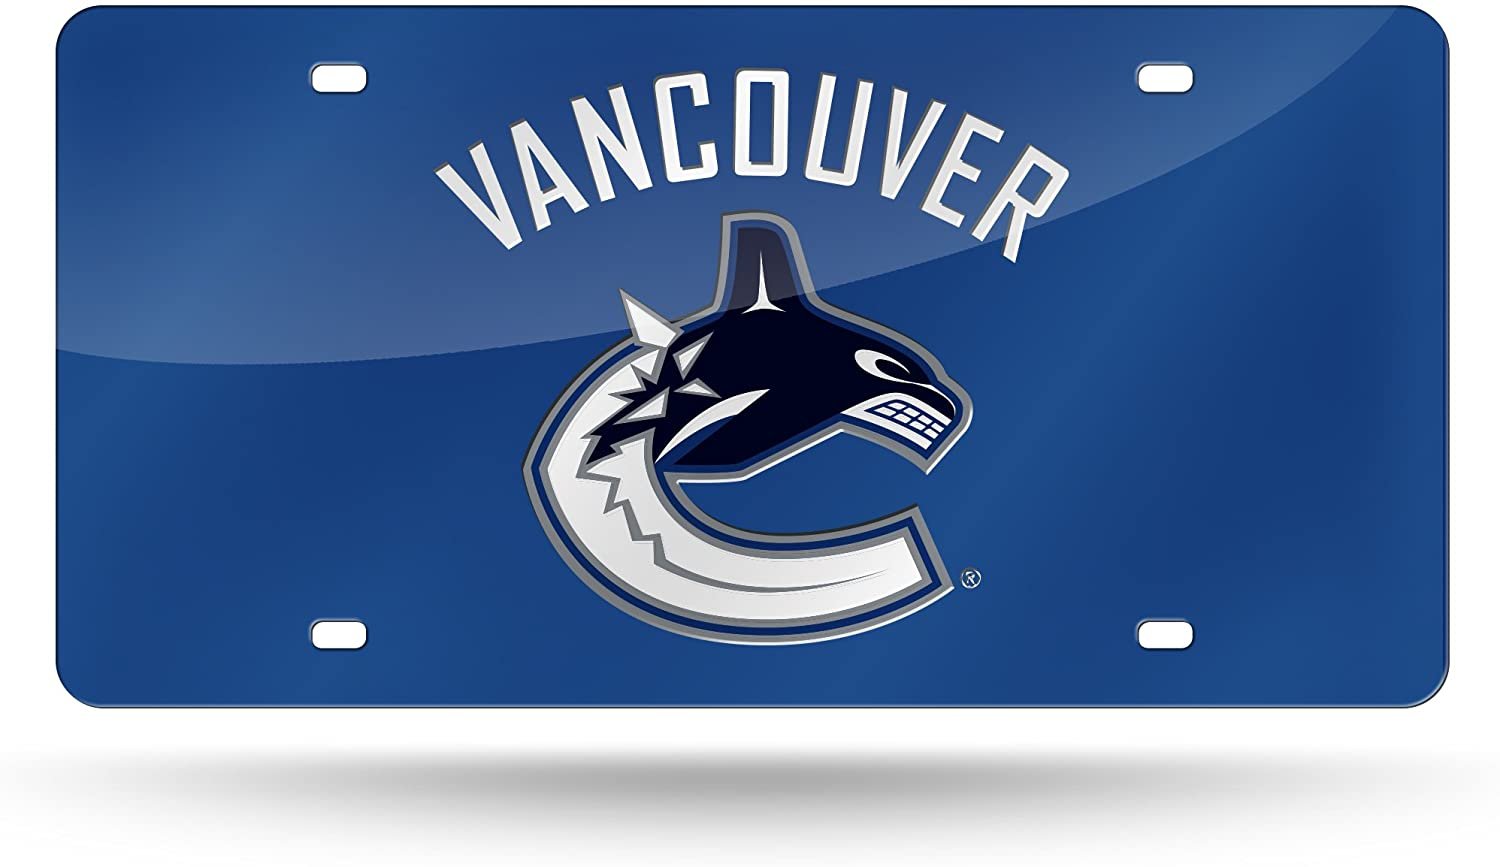 Vancouver Canucks Premium Laser Cut Tag License Plate, Blue Mirrored Acrylic Inlaid, 12x6 Inch